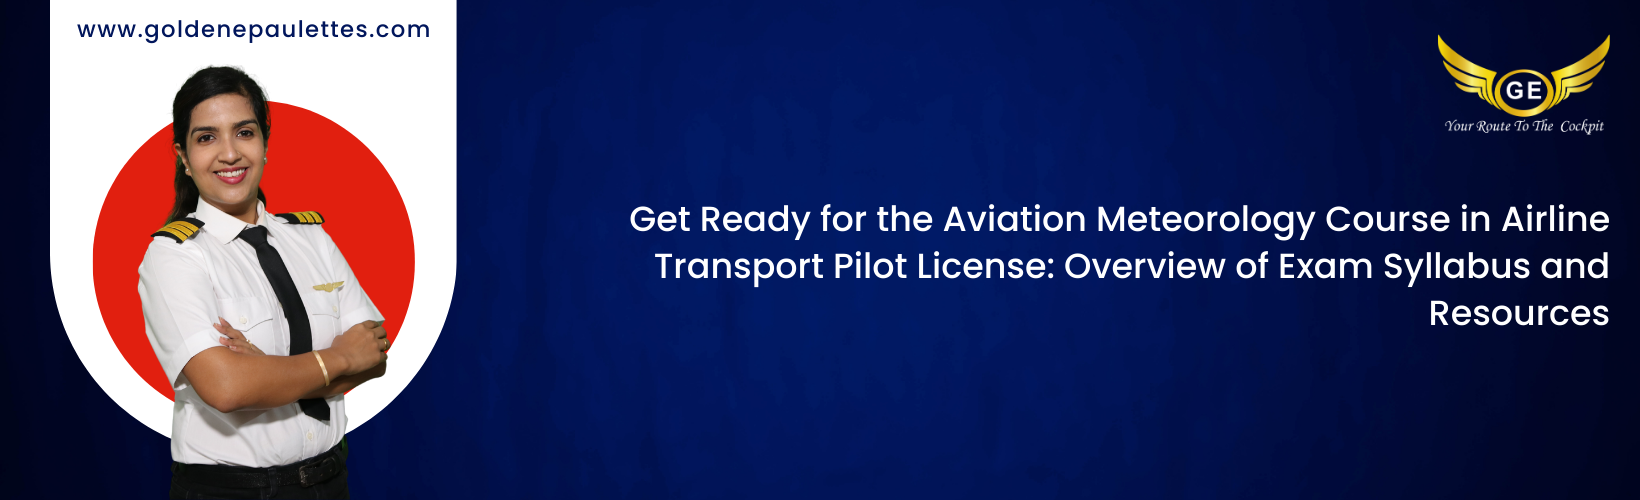 Aviation Meteorology Course Books for Airline Transport Pilot License